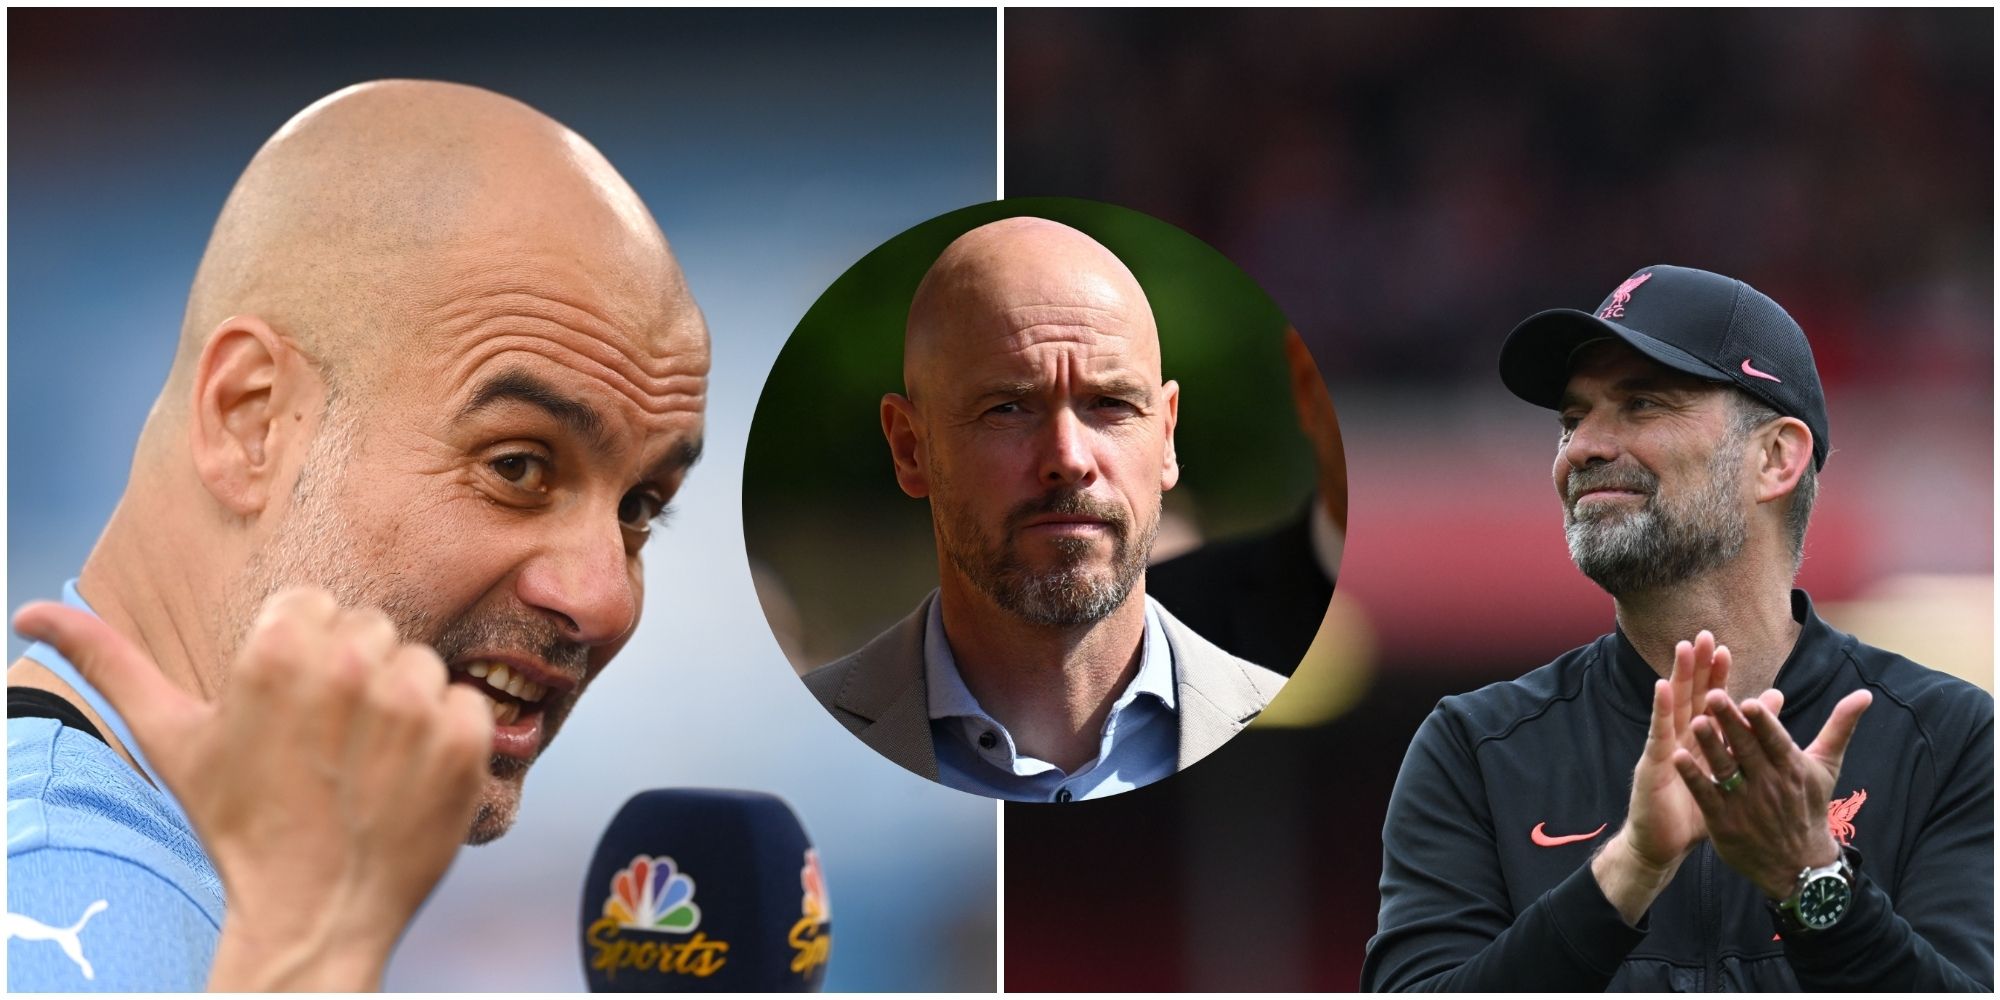 Erik ten Hag makes Liverpool claim that could horrifically backfire on new Man Utd boss: ‘I know how to deal with that’